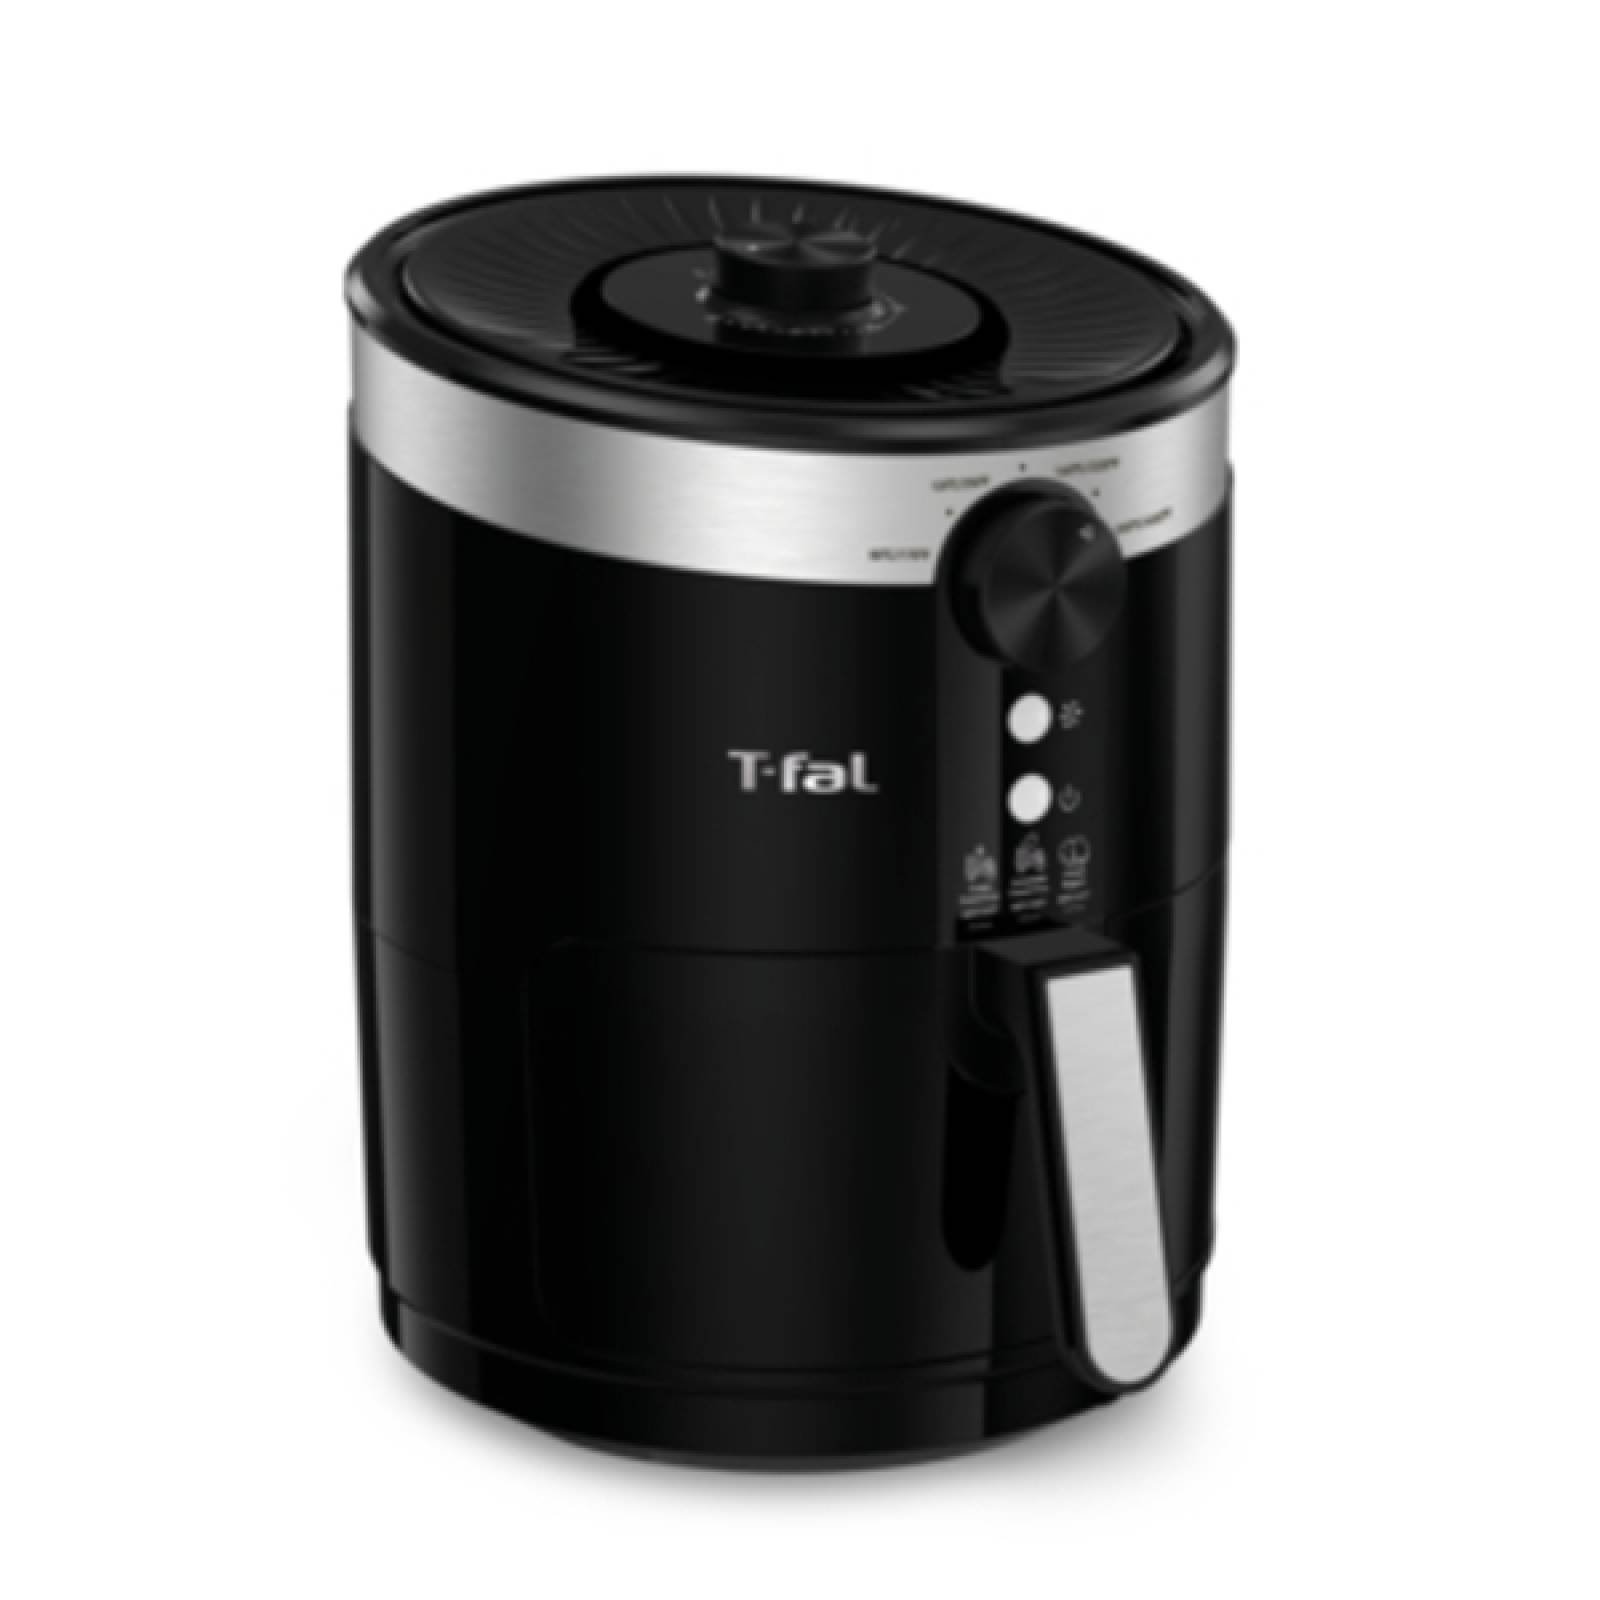 Freidora Electrica Aire Sin Aceite 35 L  4 Pers Tefal T Fal